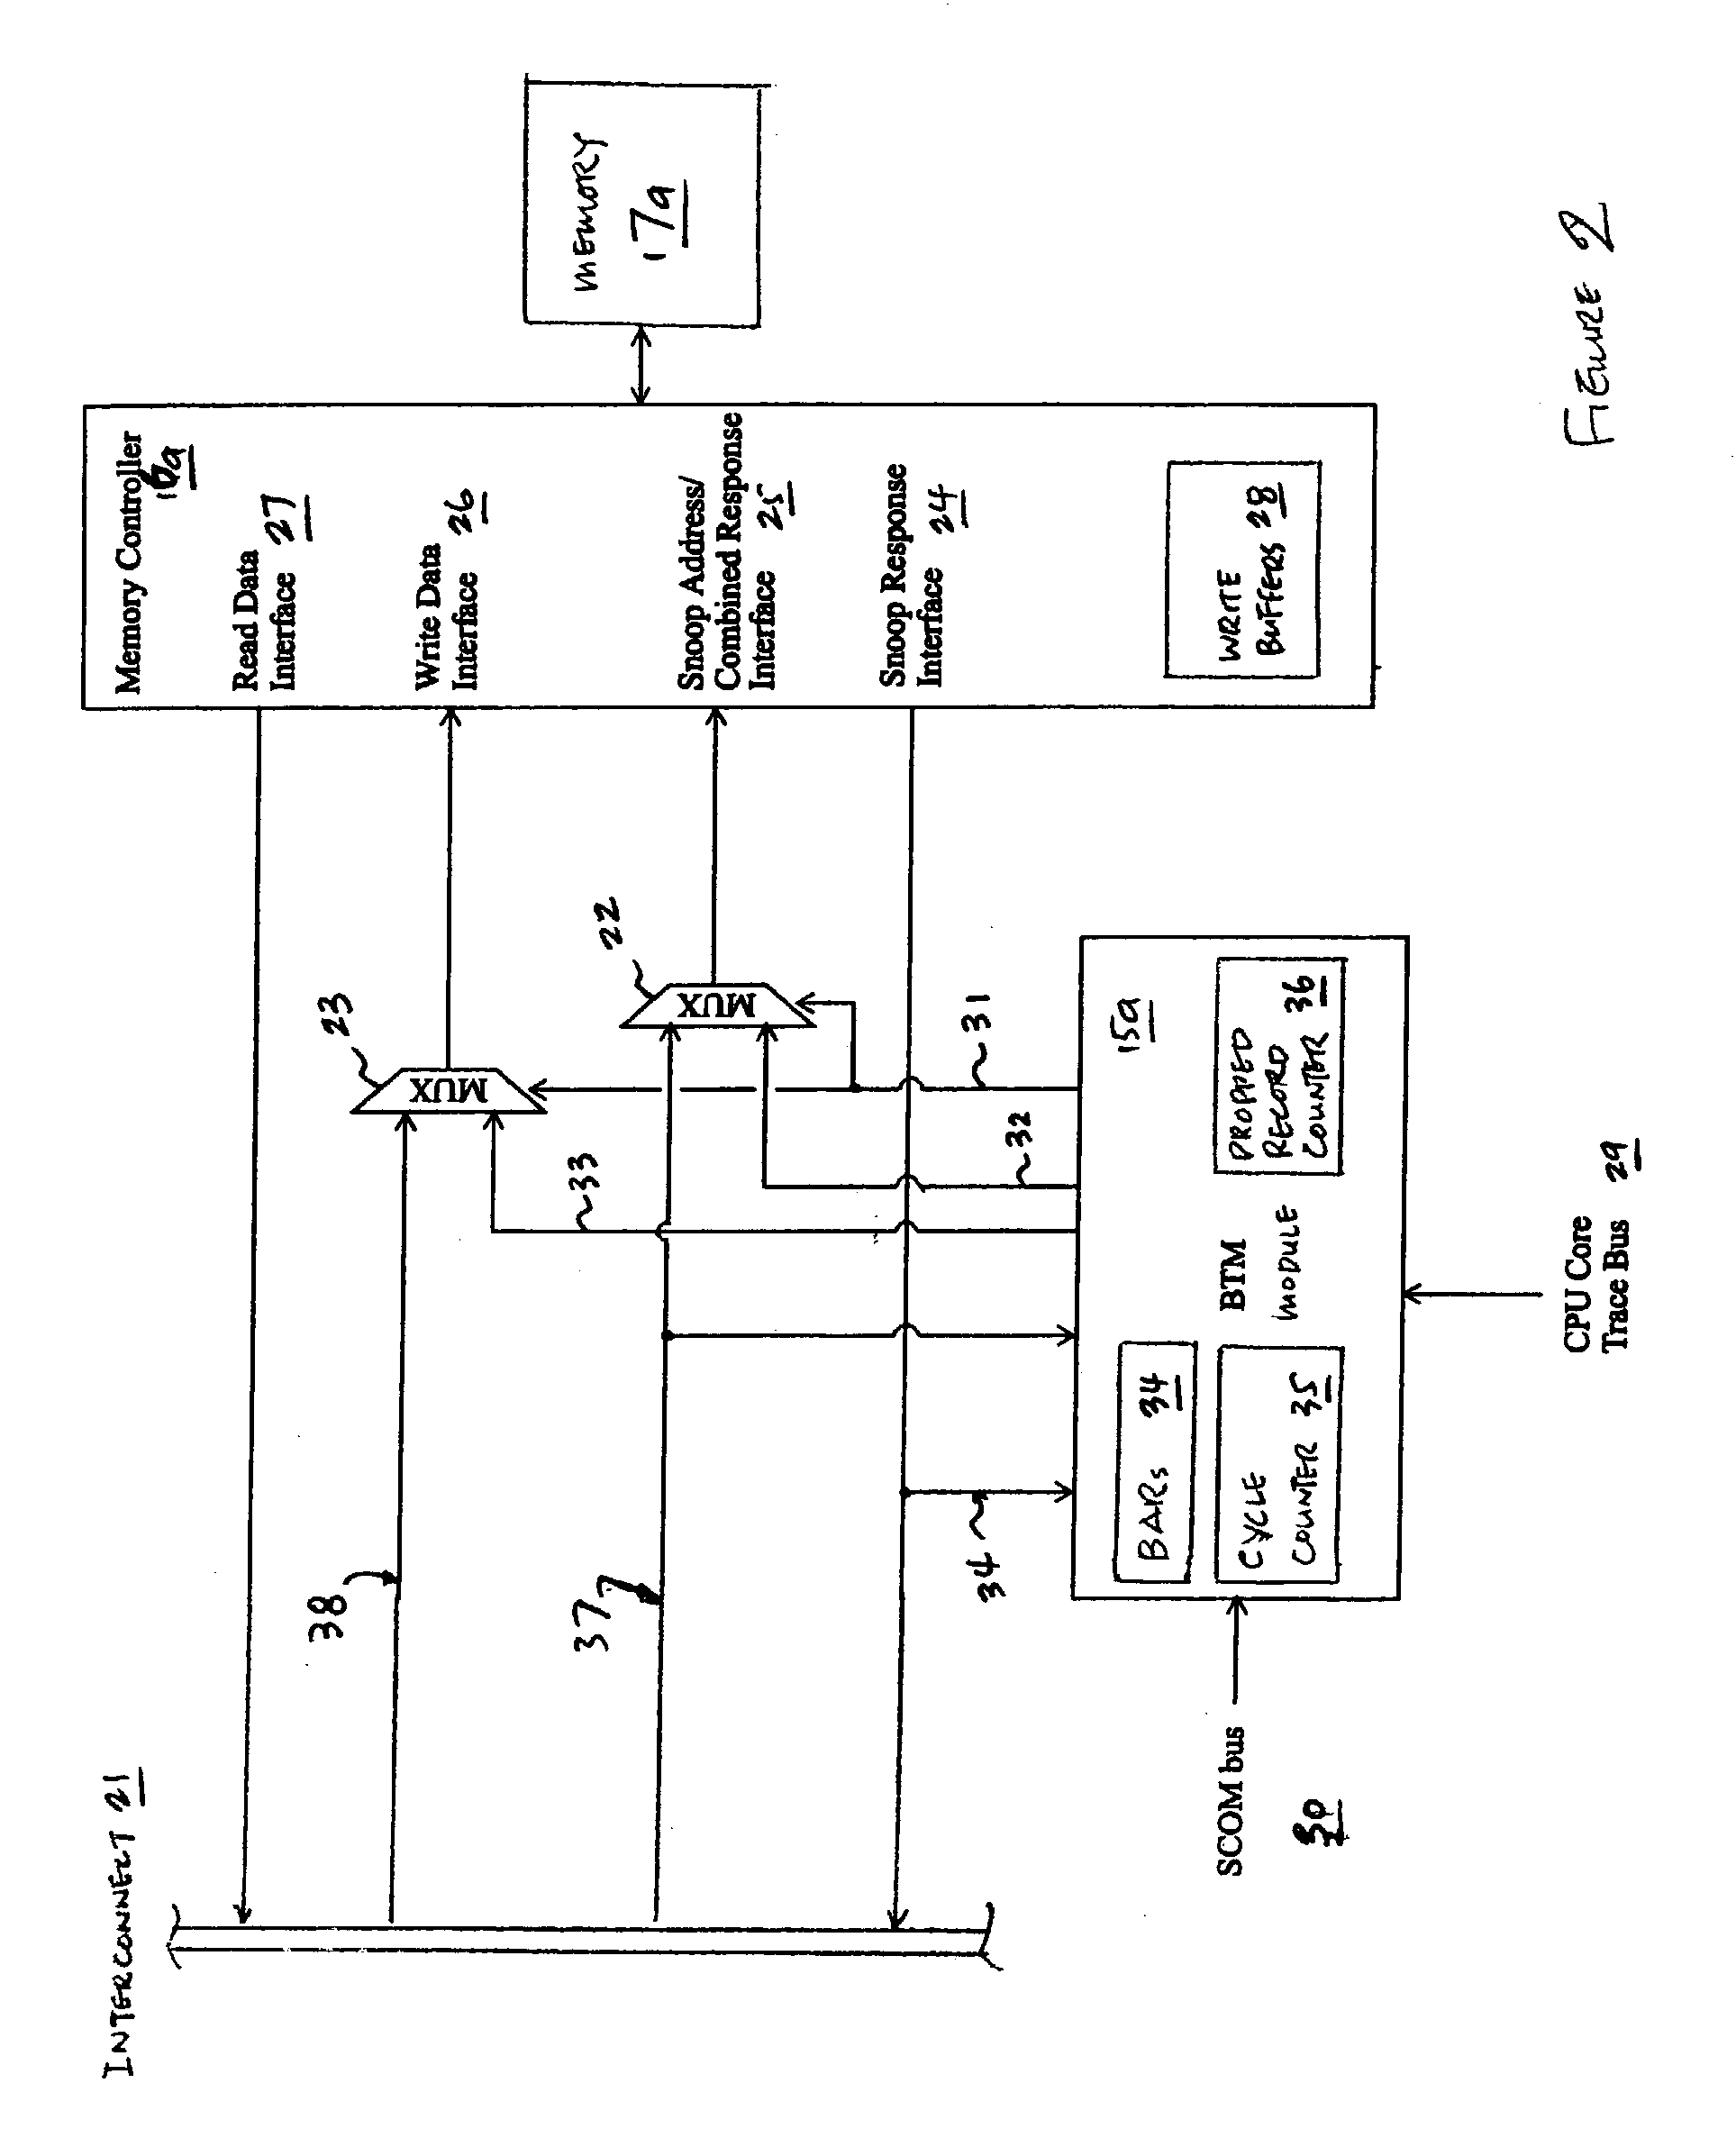 Method and apparatus for performing bus tracing in a data processing system having a distributed memory